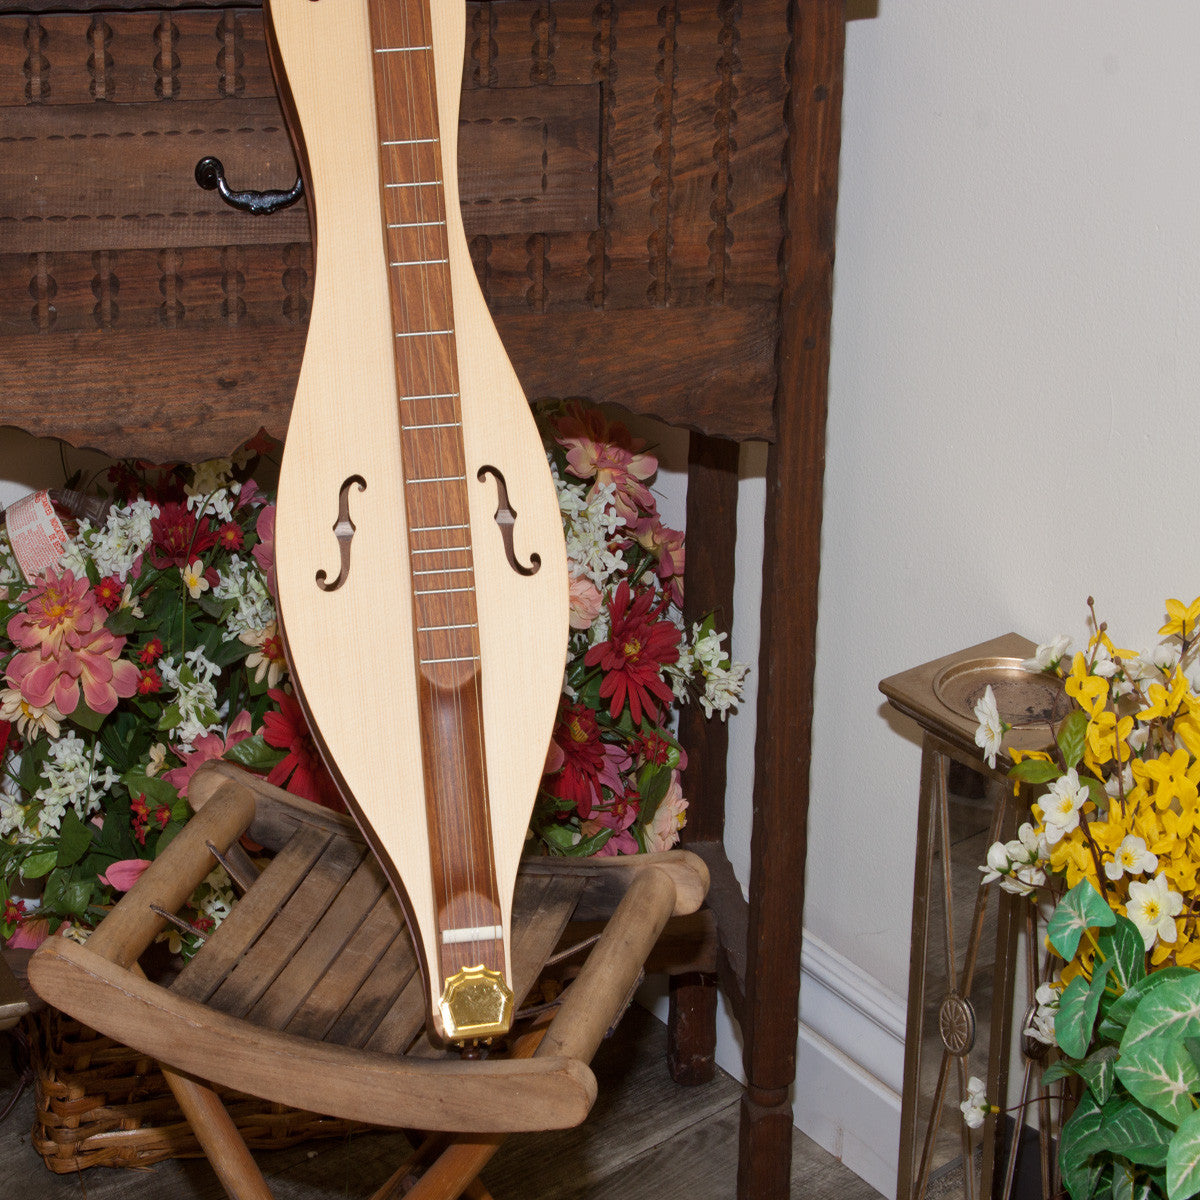 Lap Play or Stick Style! Roosebeck Cutaway Mountain Dulcimer Deluxe (5 String, Spruce SoundBoard, Ugraded Tuners)